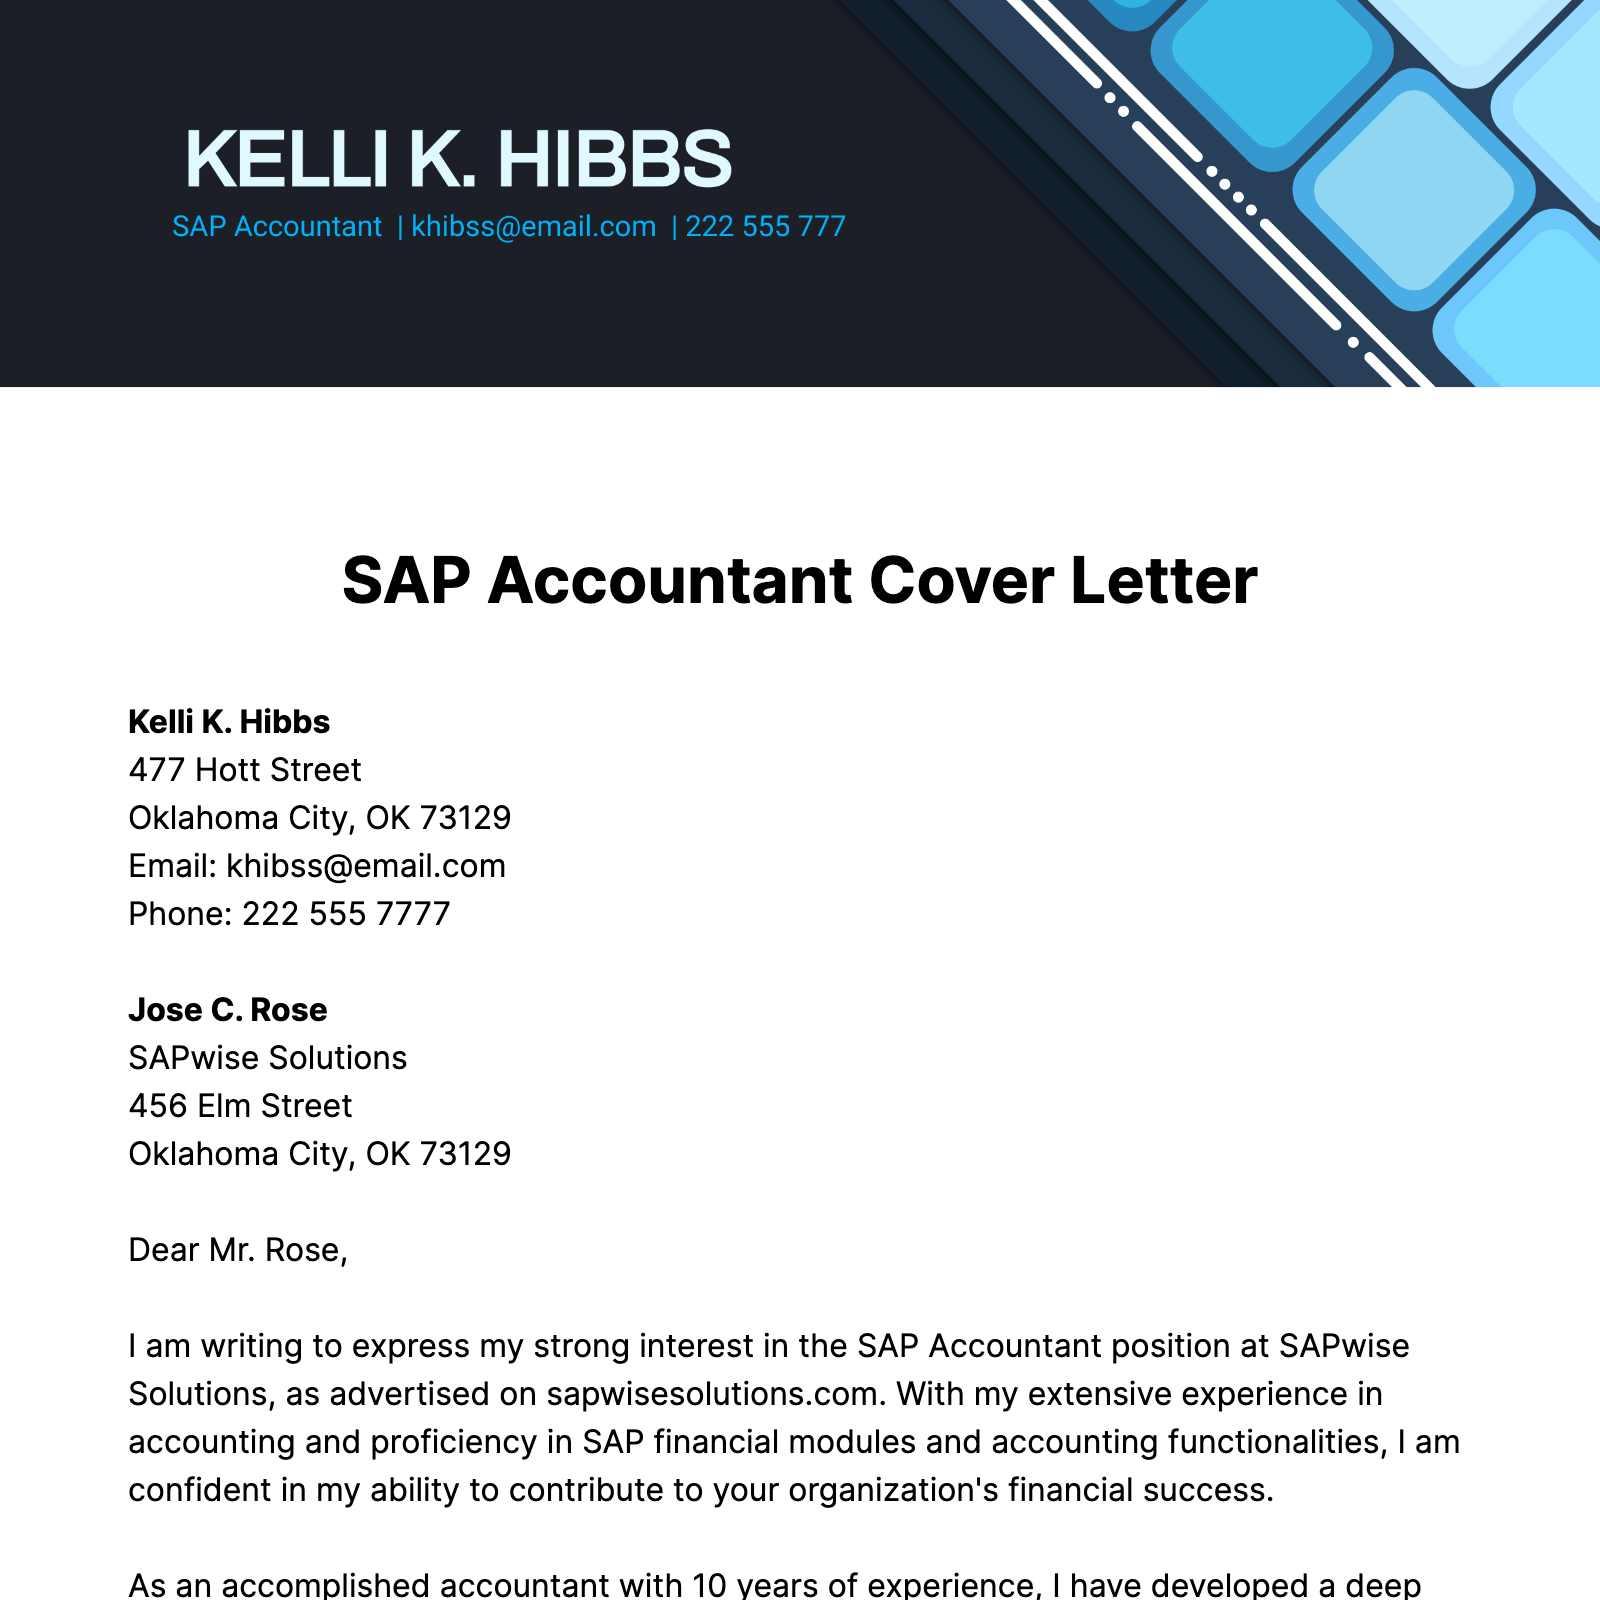 SAP Accountant Cover Letter Template